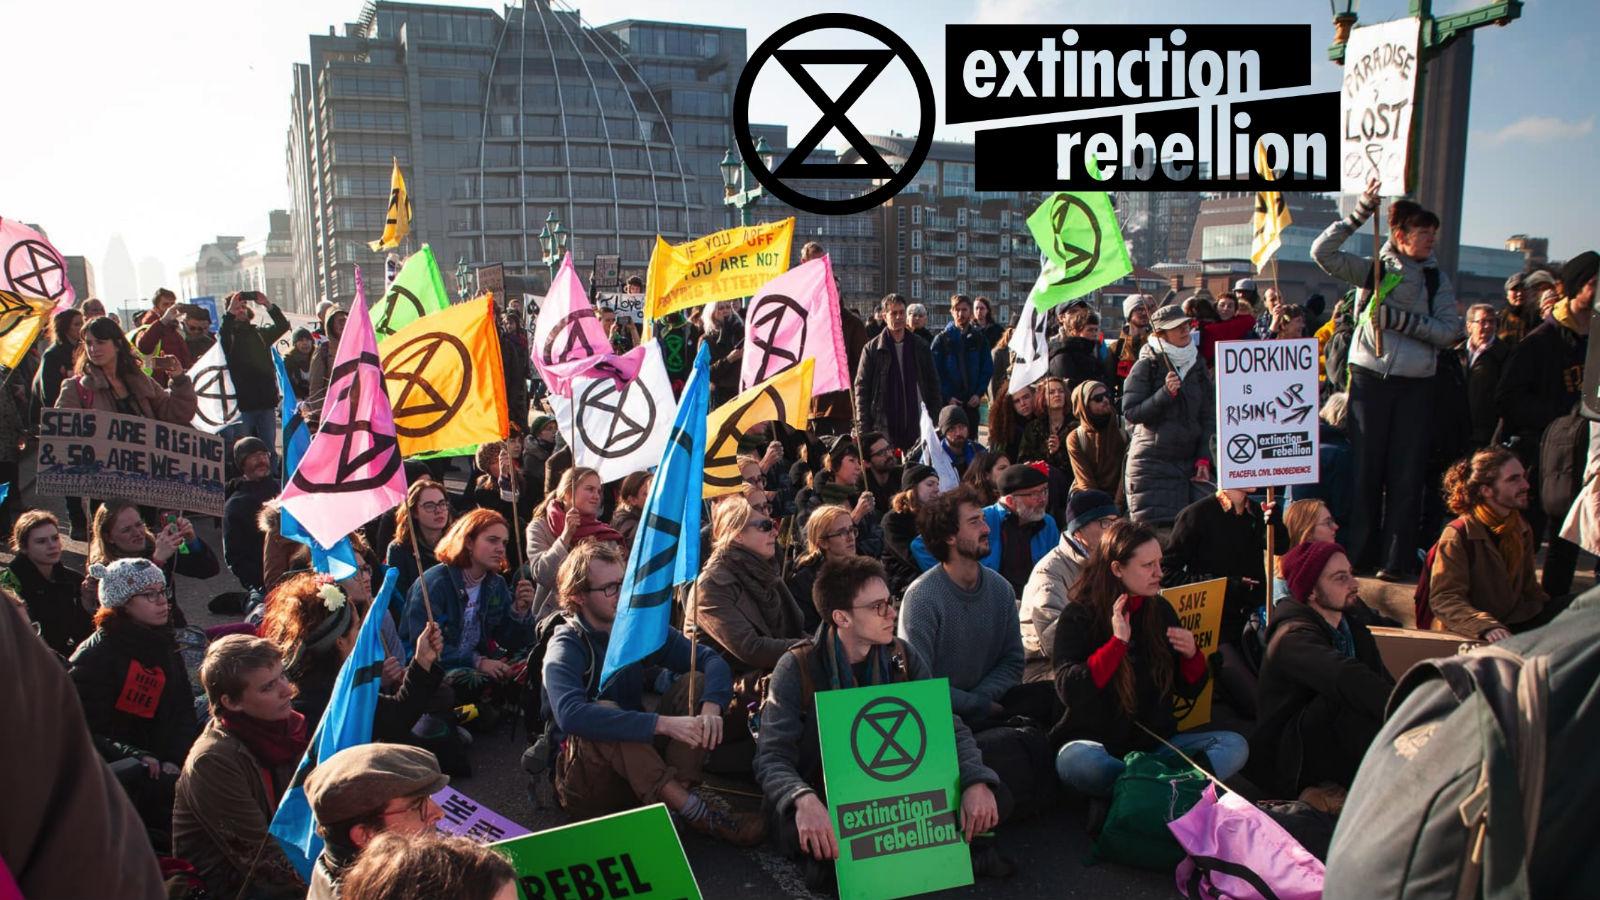 Extinction Rebellion feels need to right wrongs Prolific London